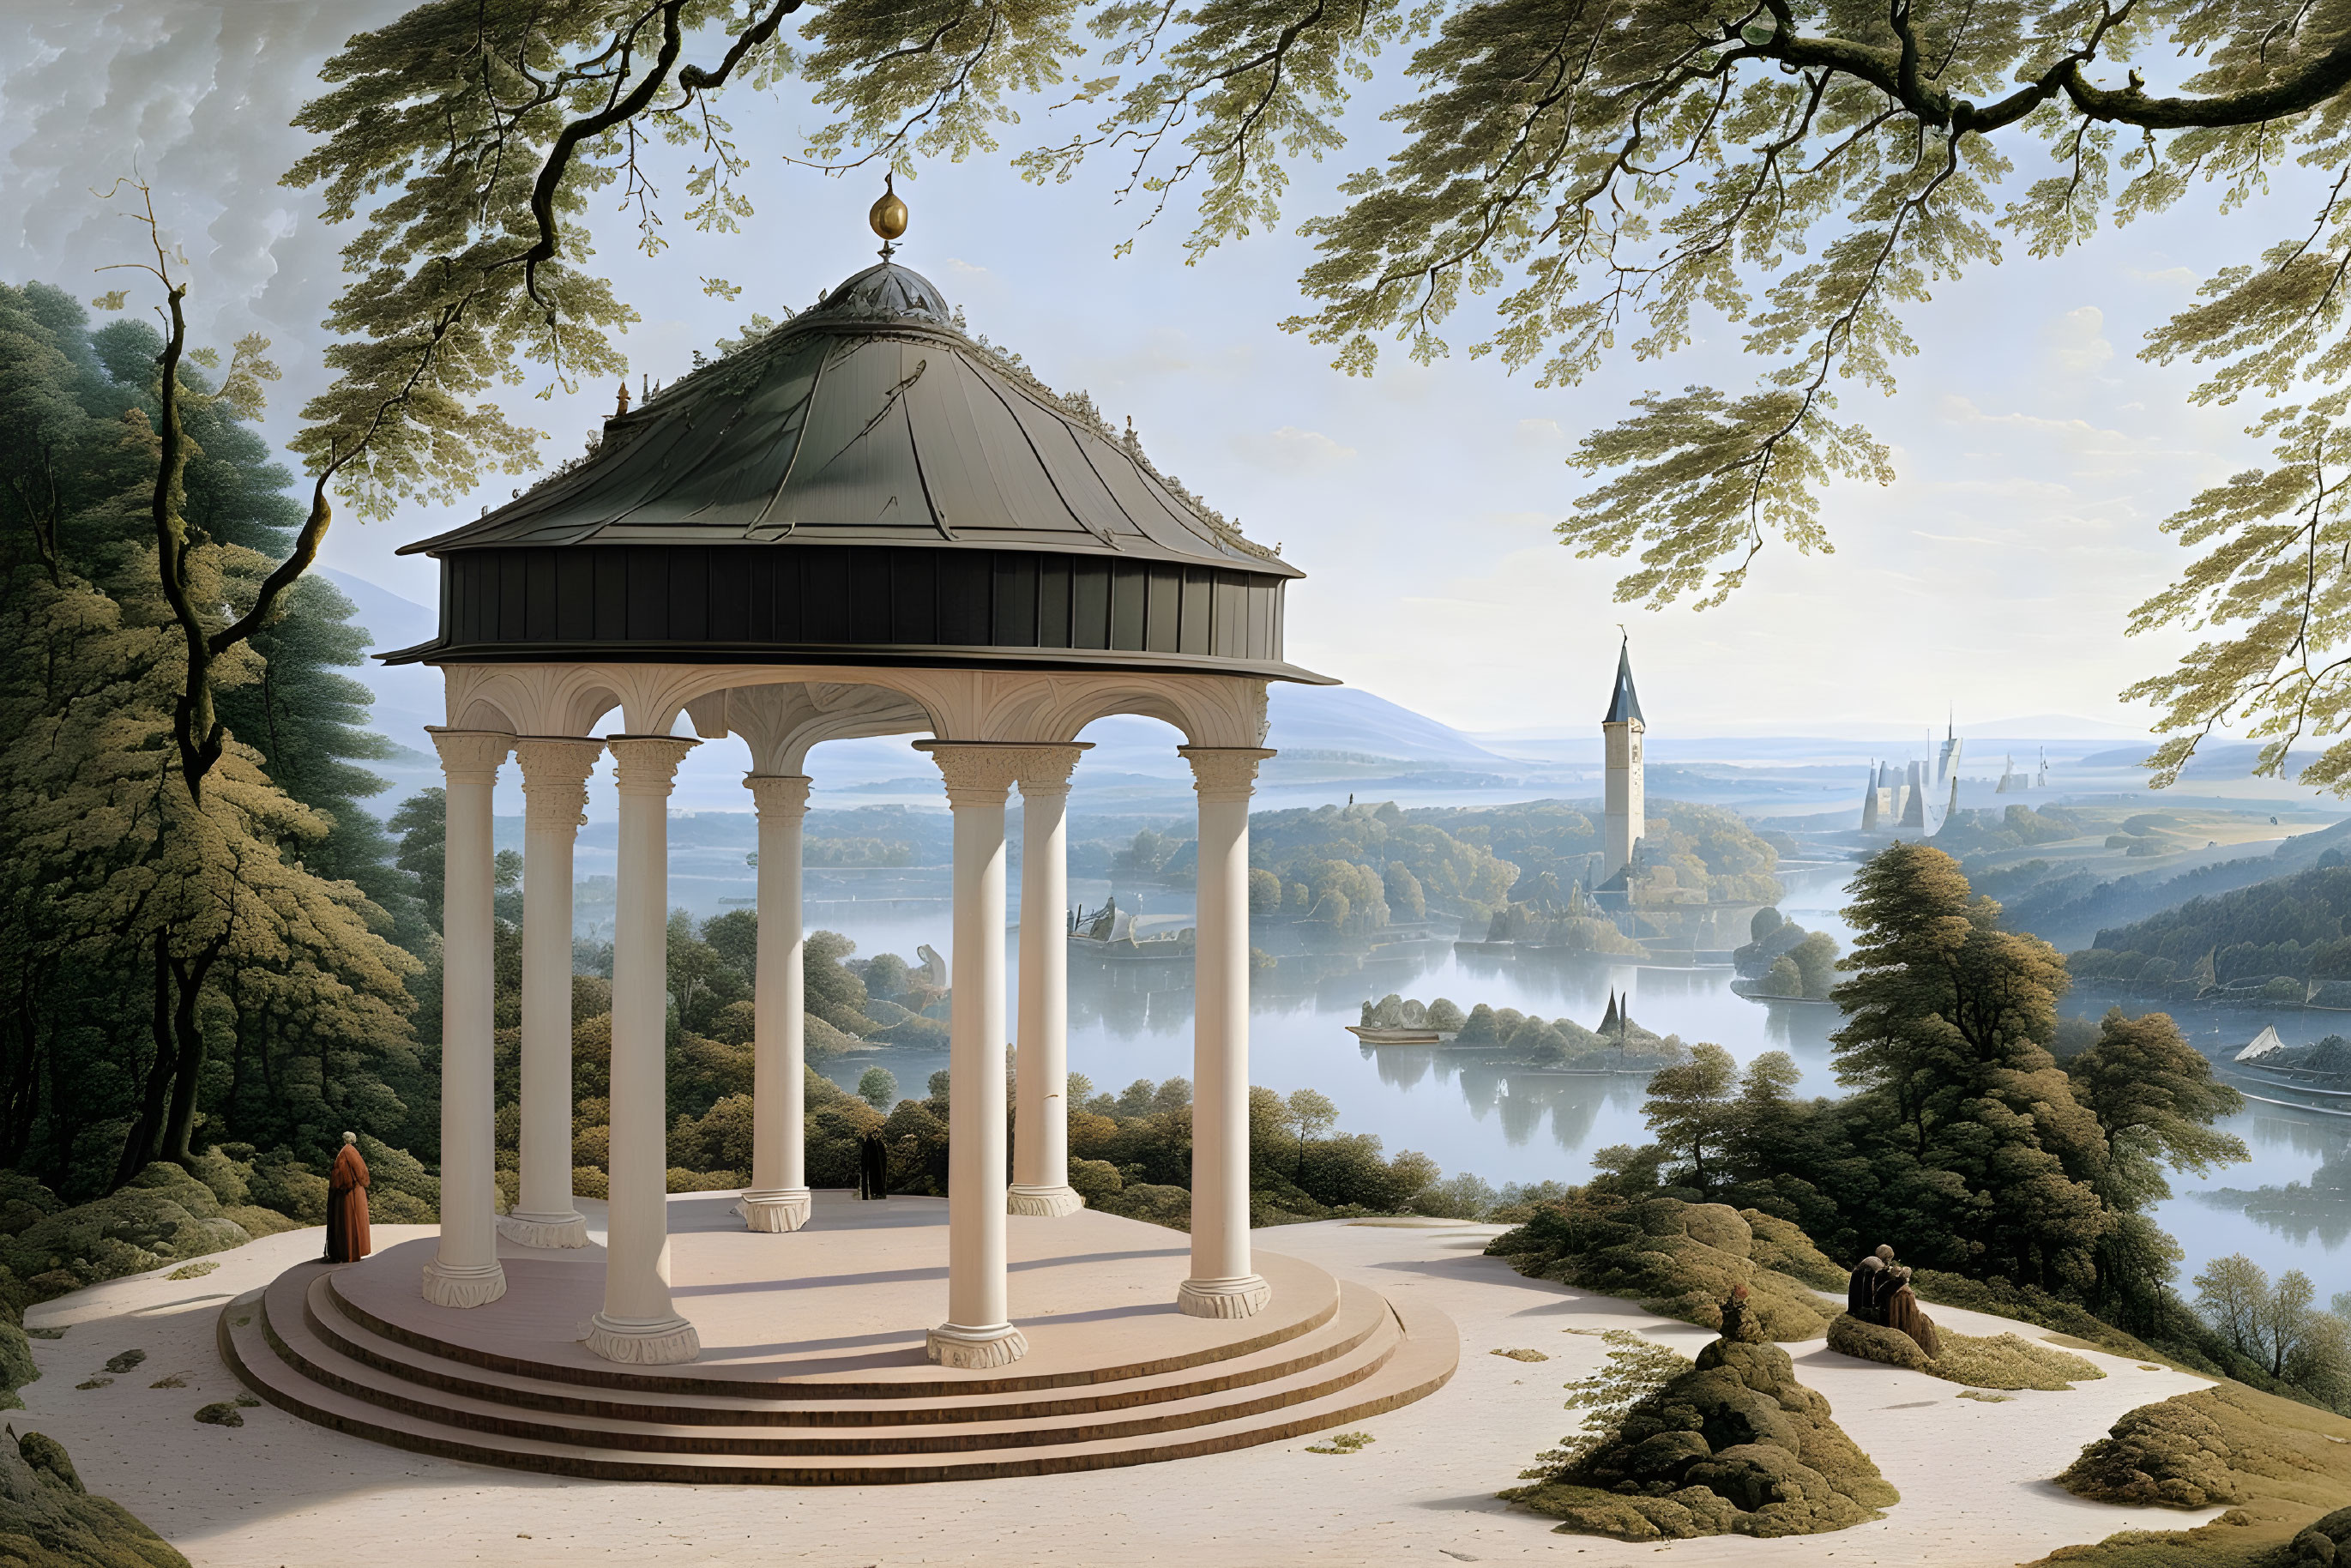 Scenic hilltop gazebo by tranquil lake and lush trees